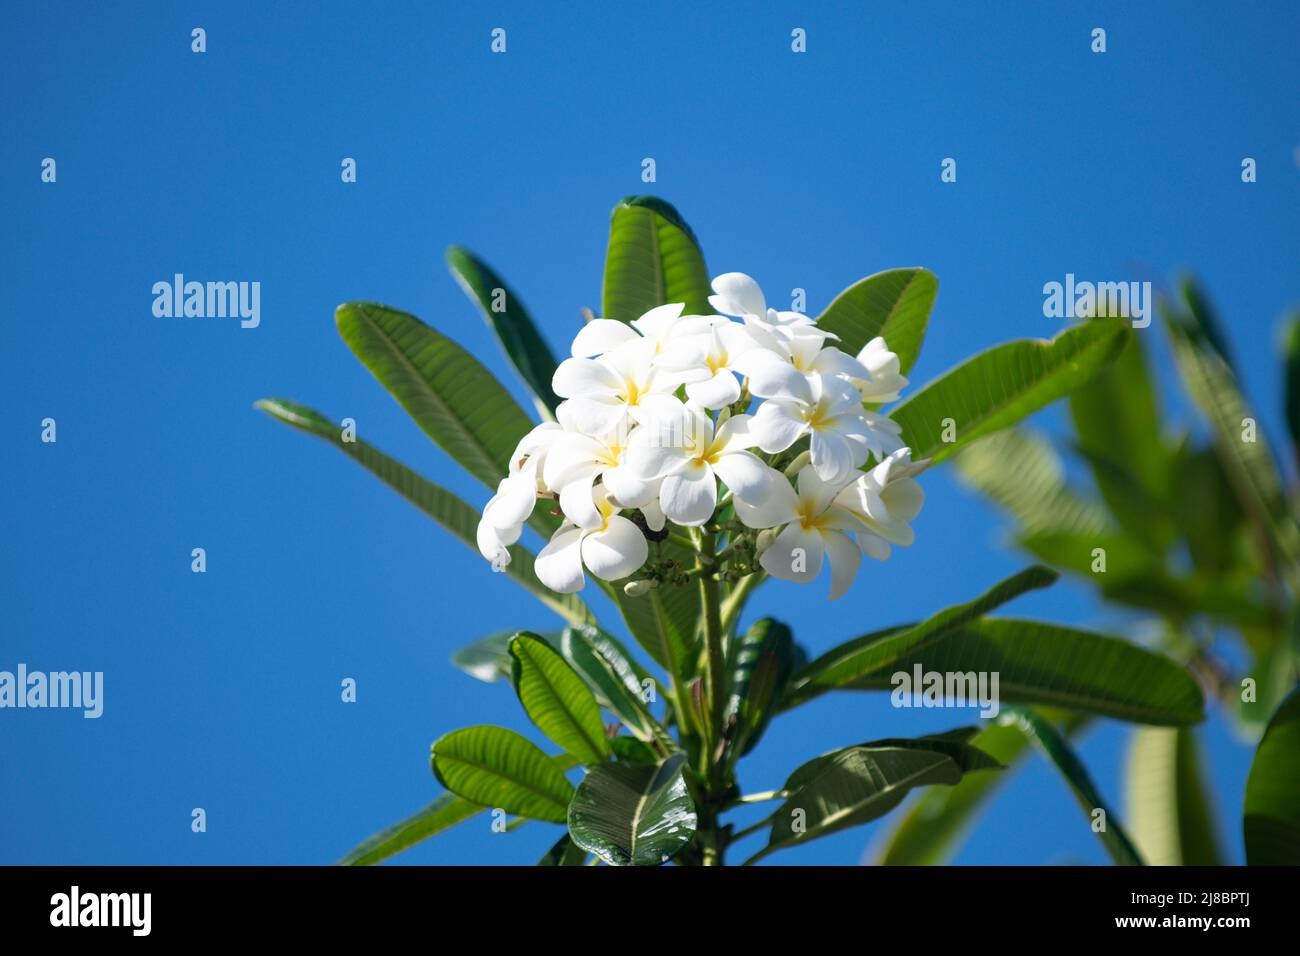 White plumeria rubra flowers on blue sky background. Frangipani flower. Plumeria pudica white flowers blooming, with green leaves background. Stock Photo